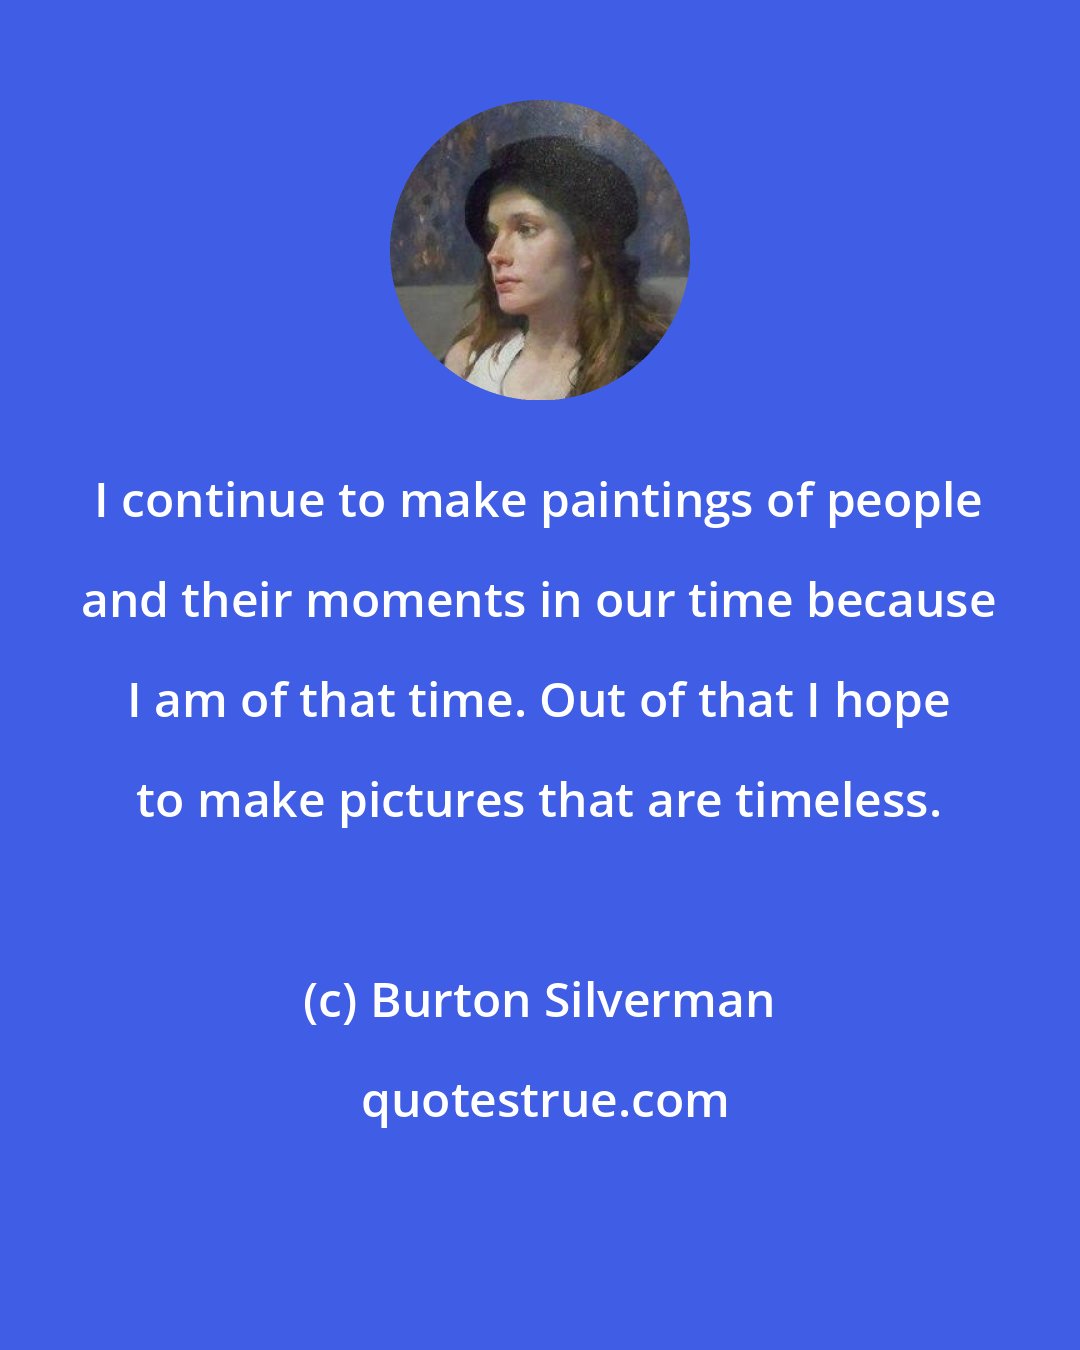 Burton Silverman: I continue to make paintings of people and their moments in our time because I am of that time. Out of that I hope to make pictures that are timeless.